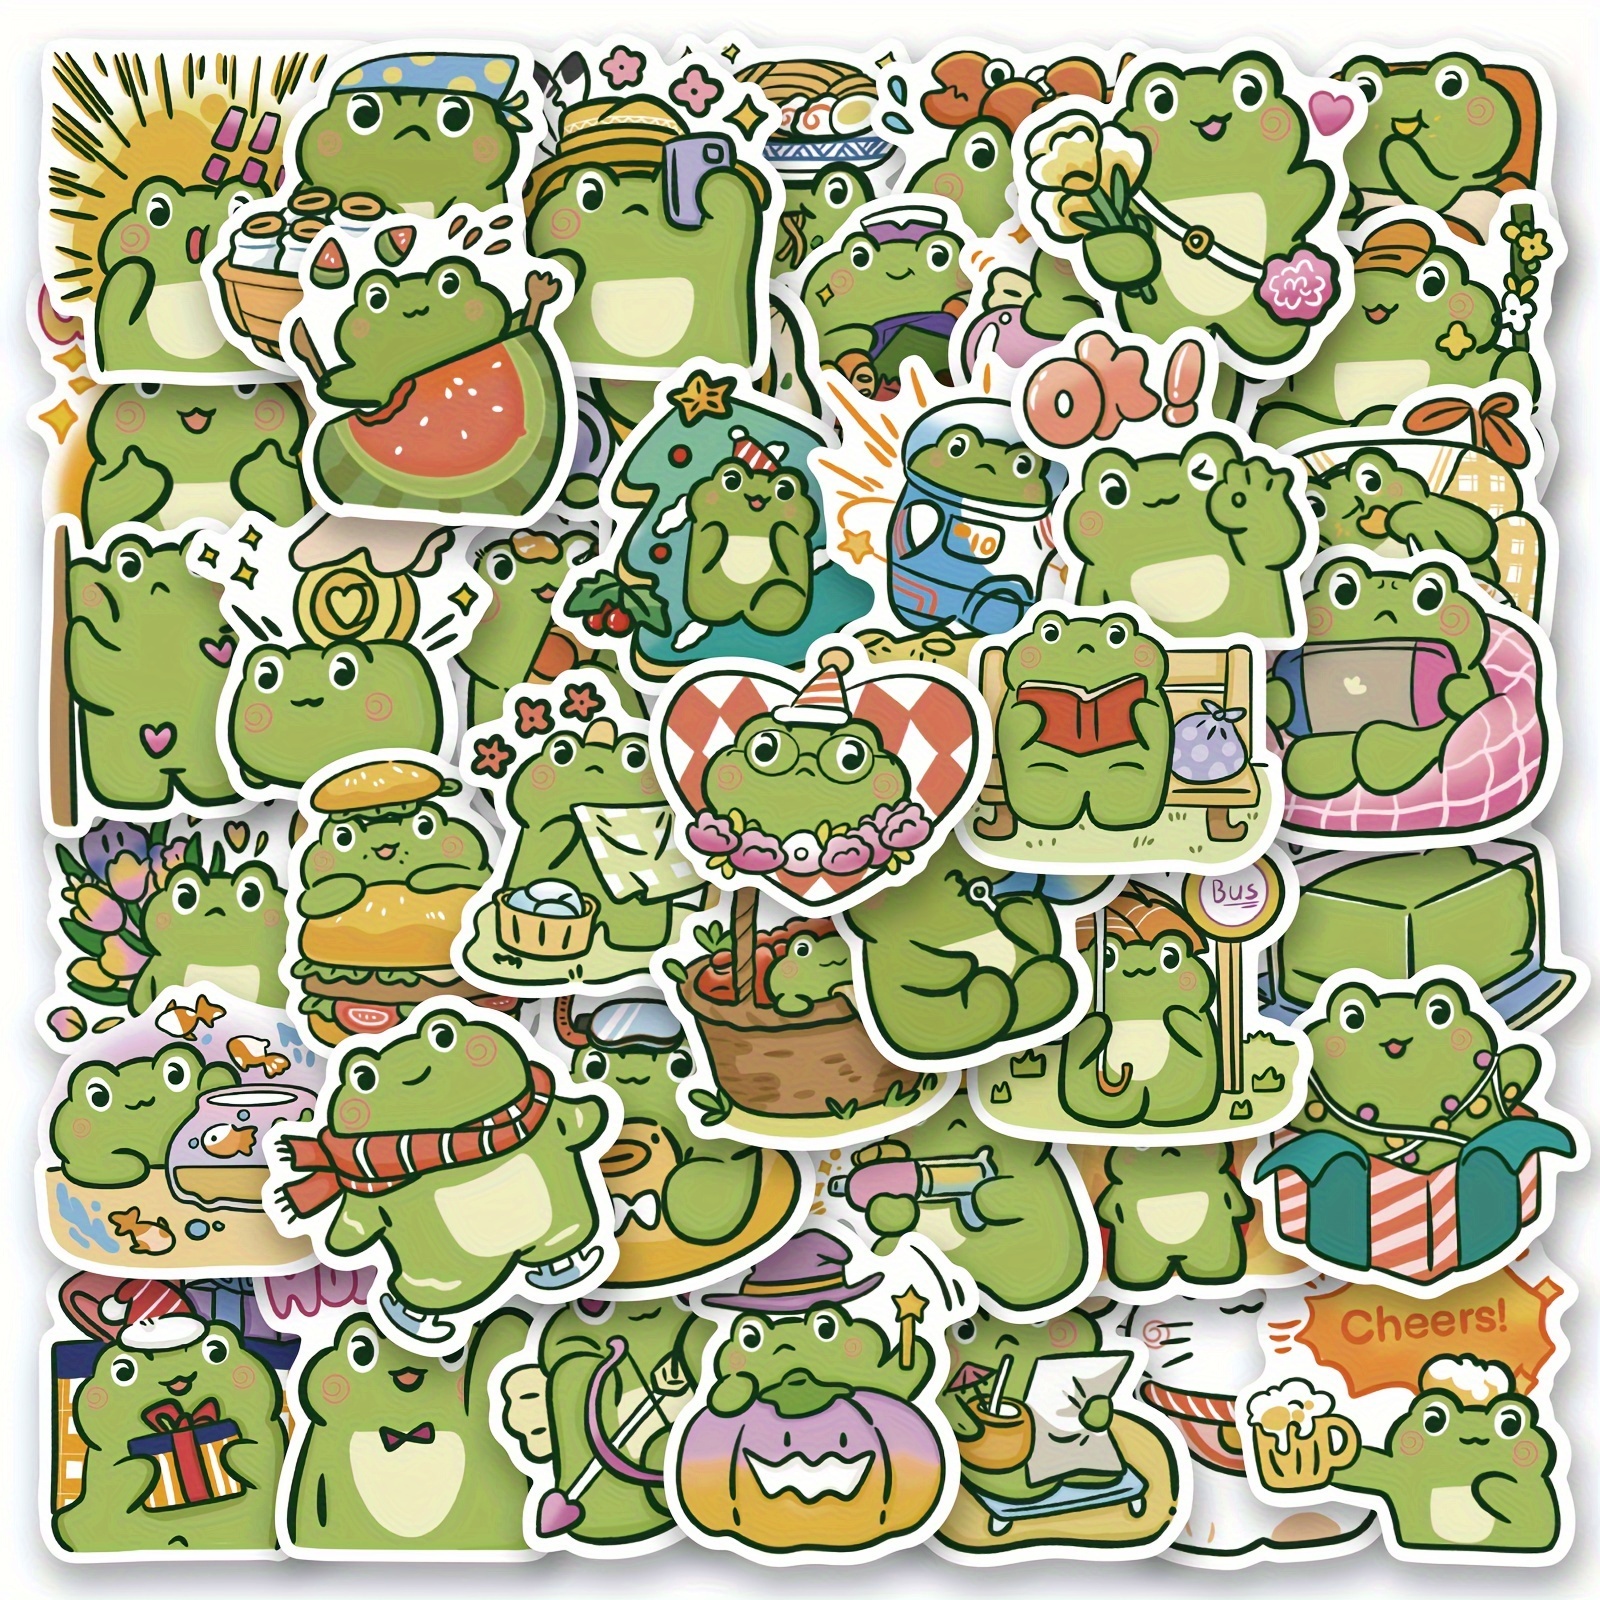 Cute frog gift ideas, frog kids tee, frog kids hoodies, frog home decor  gifts - Frog - Sticker